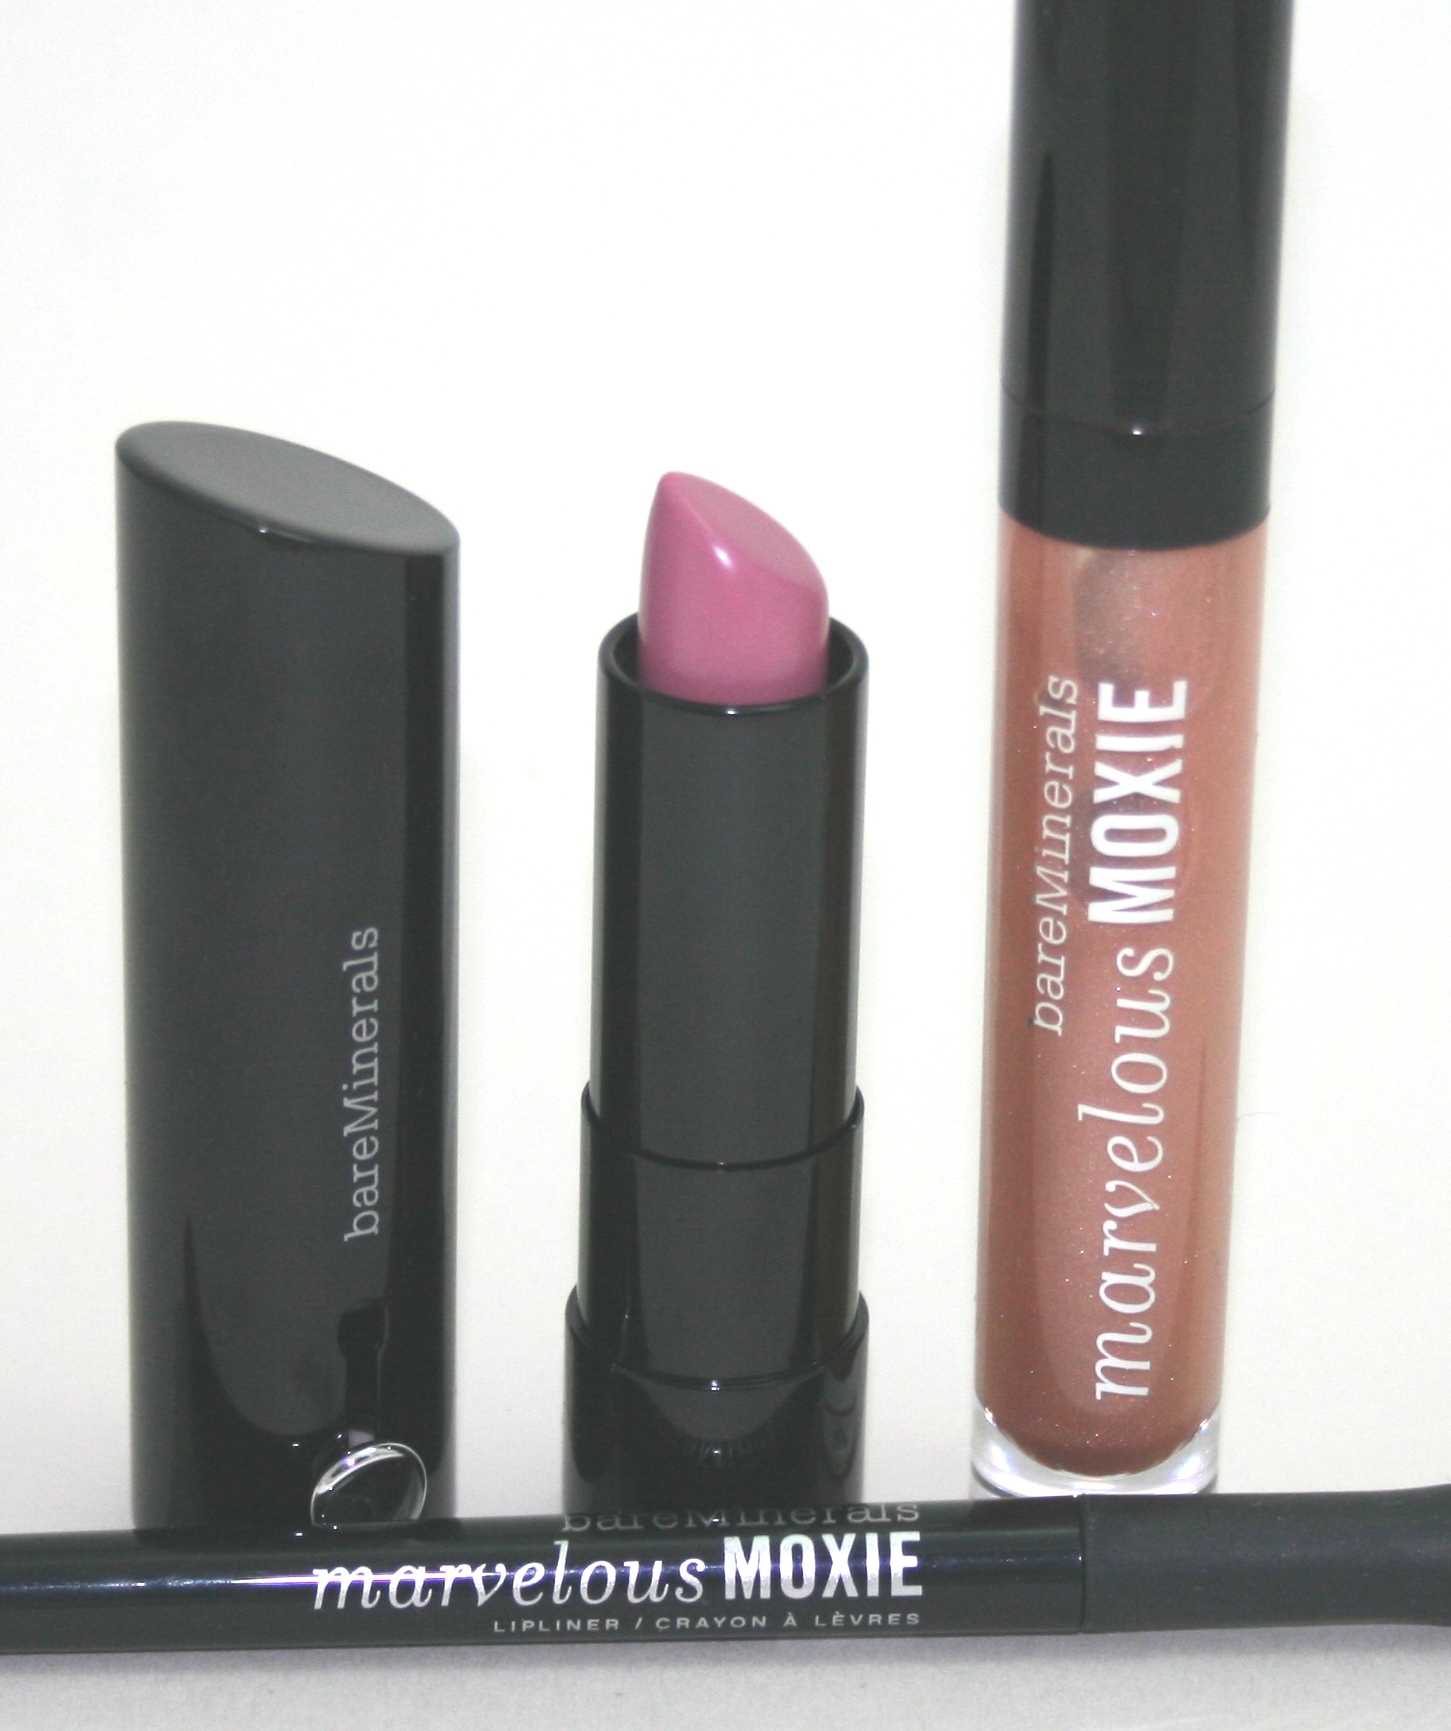 BareMinerals Marvelous Moxie New Lip Products